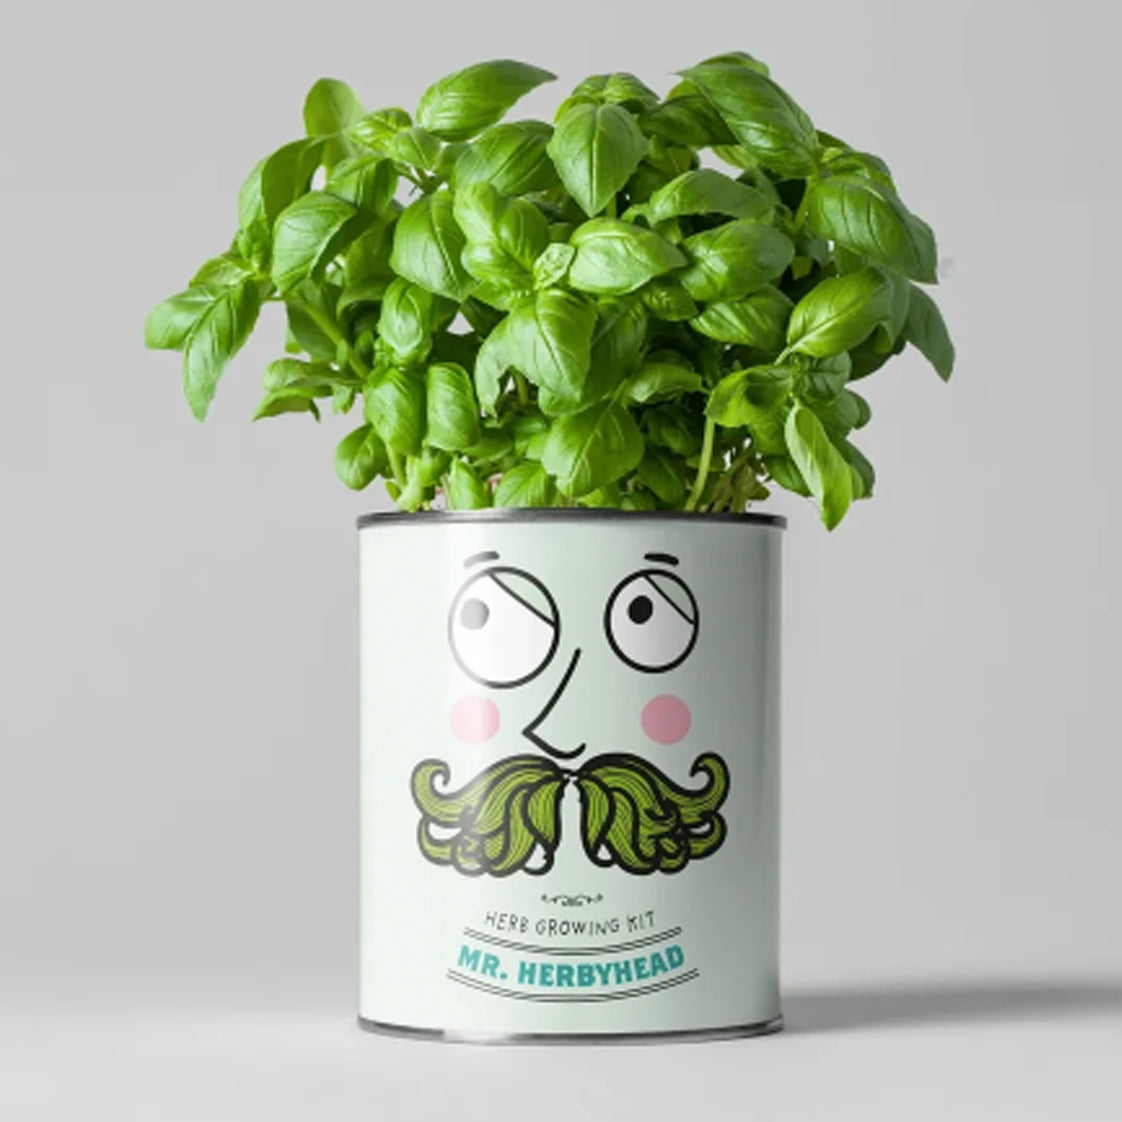 The Plant Gift Co. Mr Herby Head - Grow Your Own Plant Kit